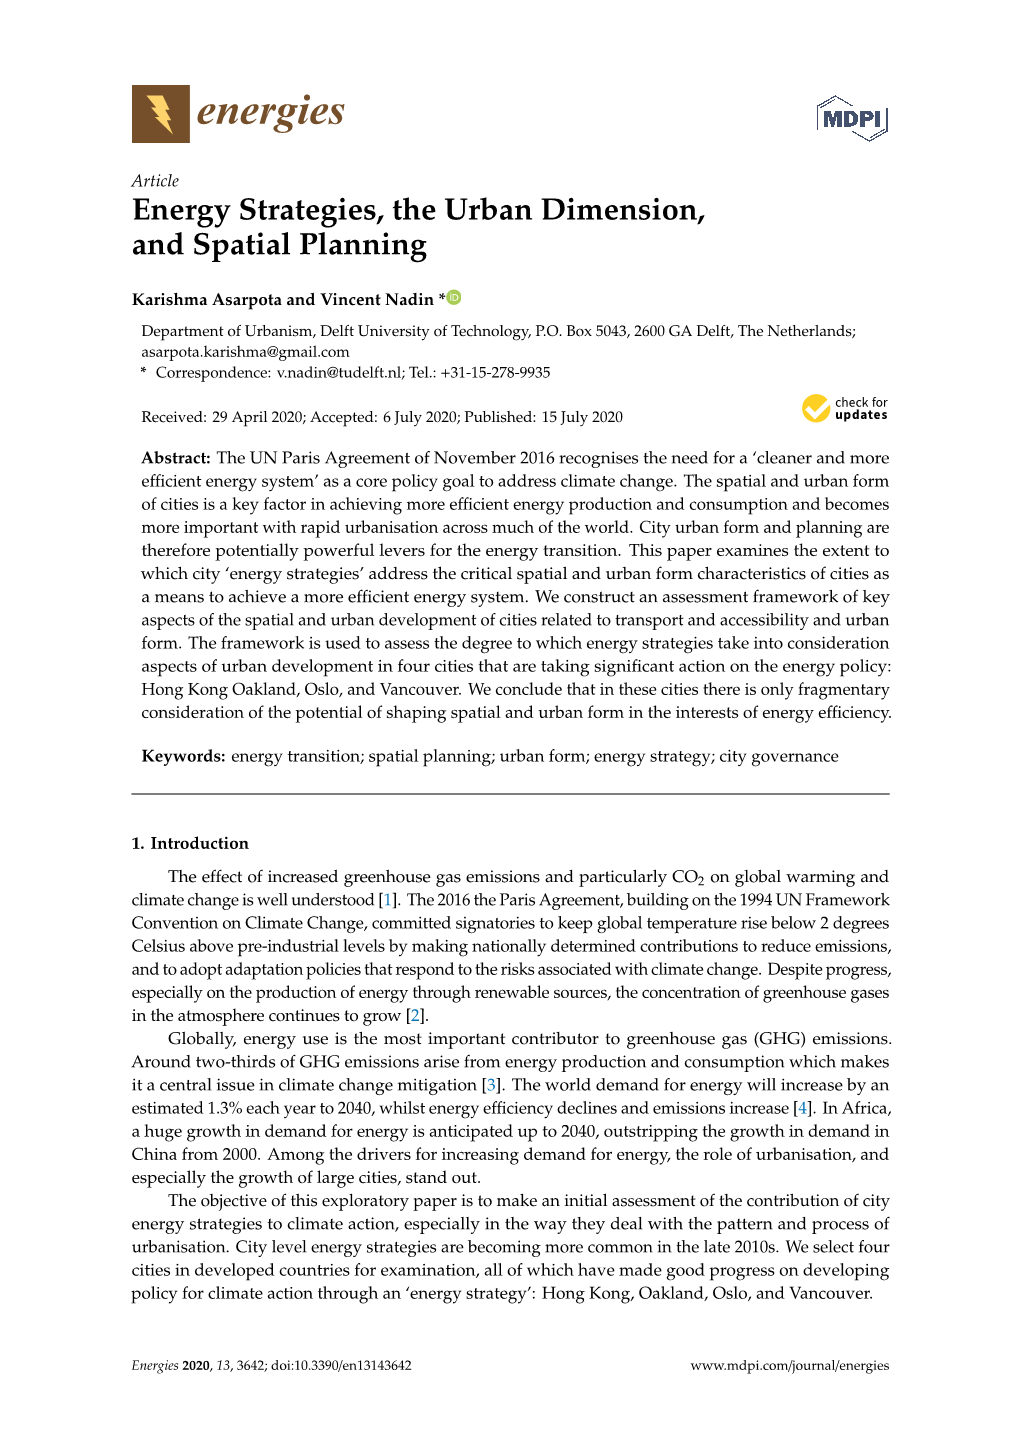 Energy Strategies, the Urban Dimension, and Spatial Planning